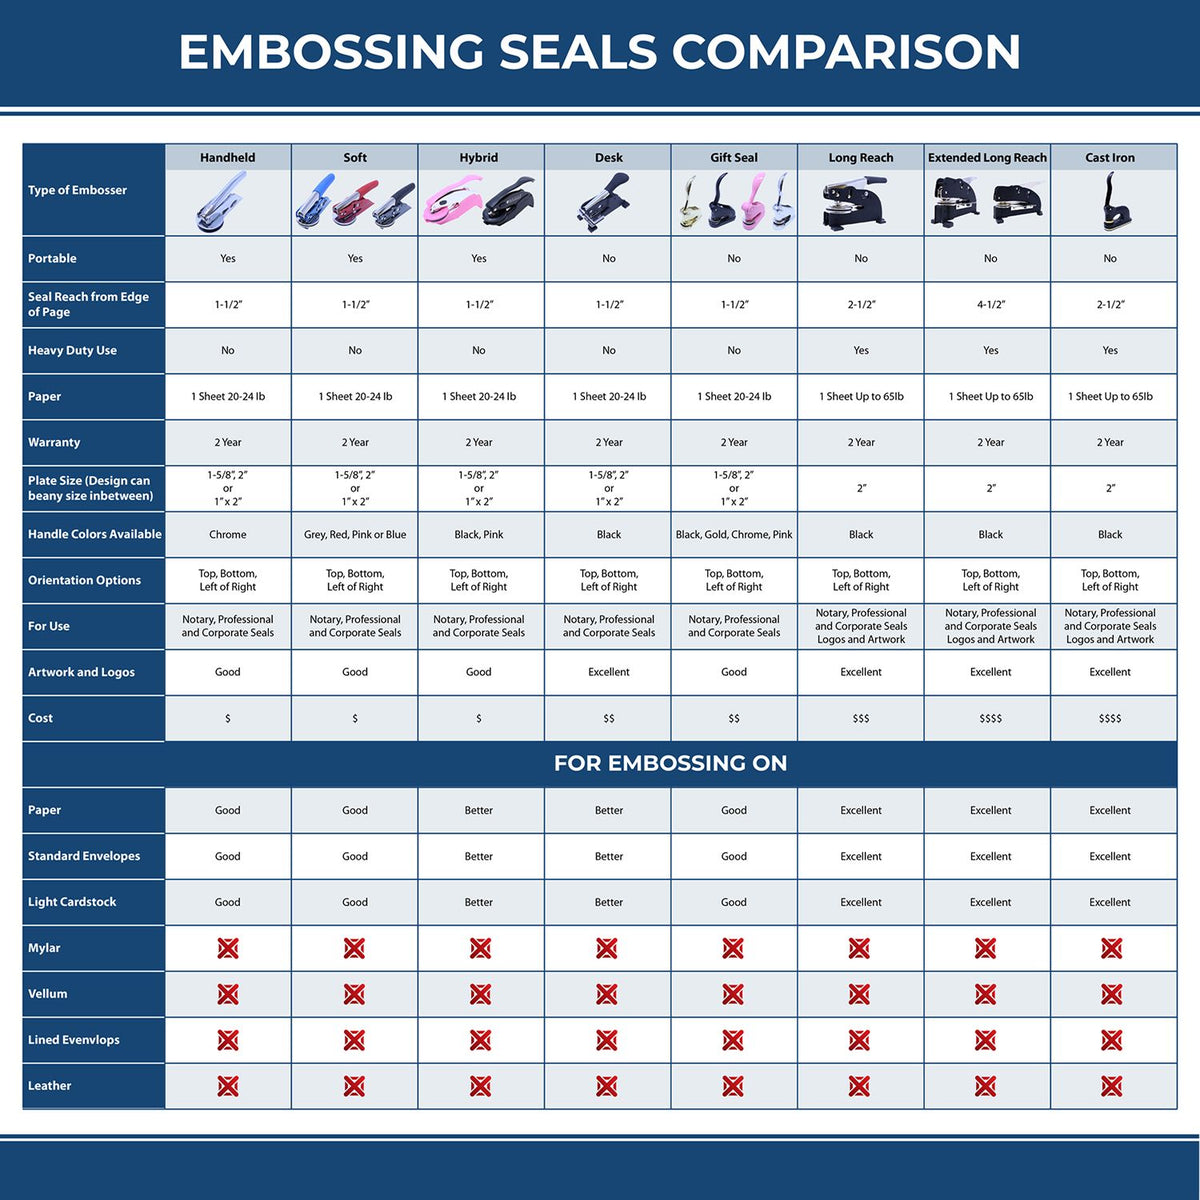 A comparison chart for the different types of mount models available for the Heavy Duty Cast Iron Massachusetts Land Surveyor Seal Embosser.